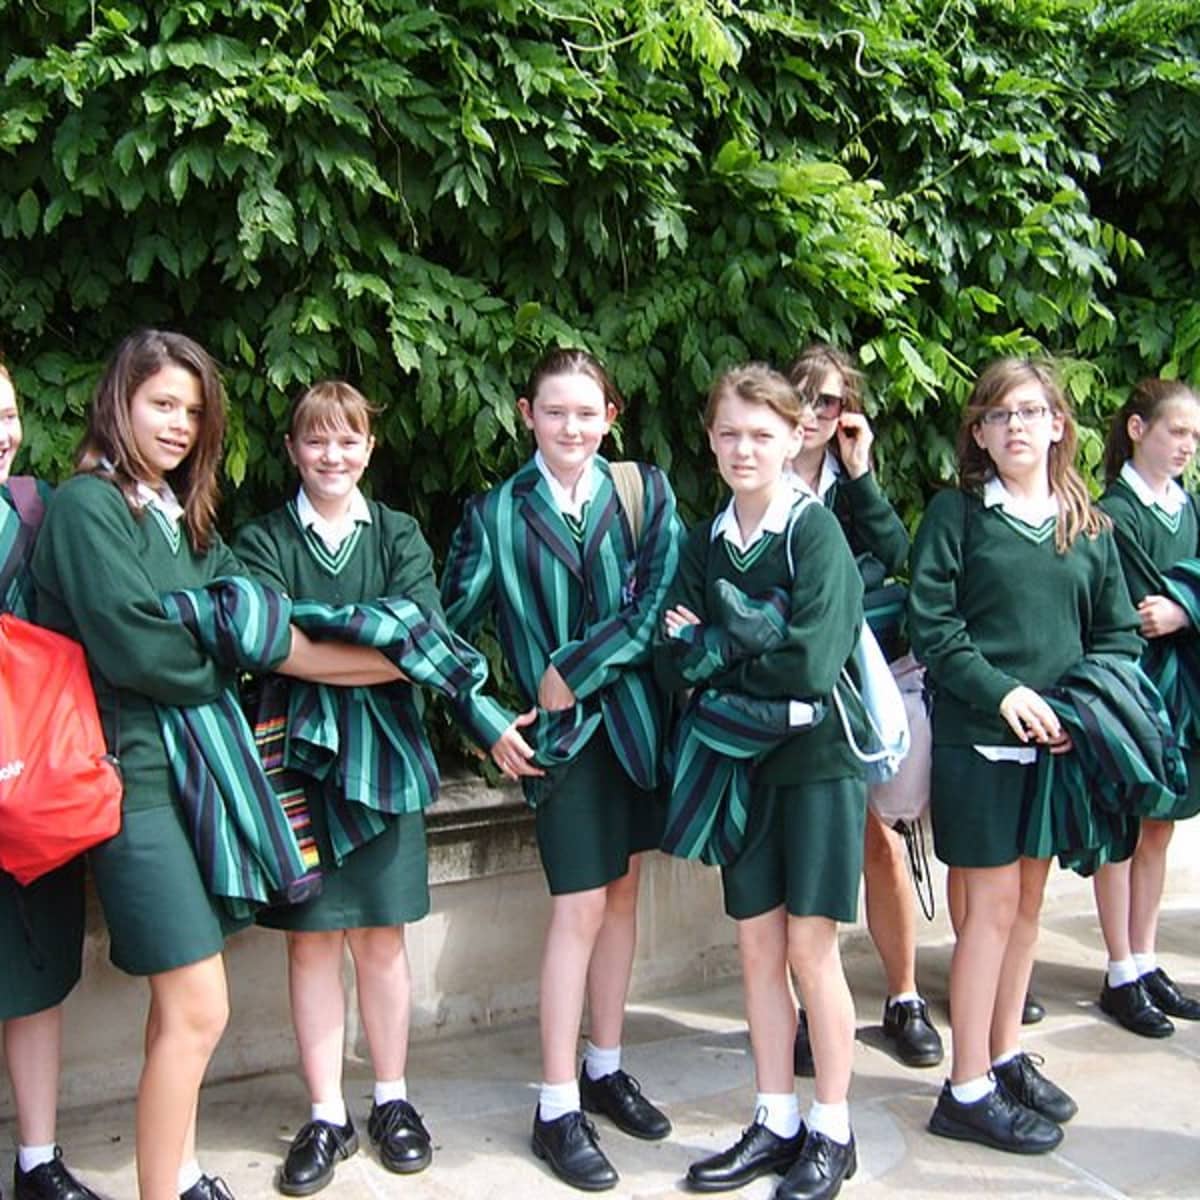 school uniforms should be compulsory for and against